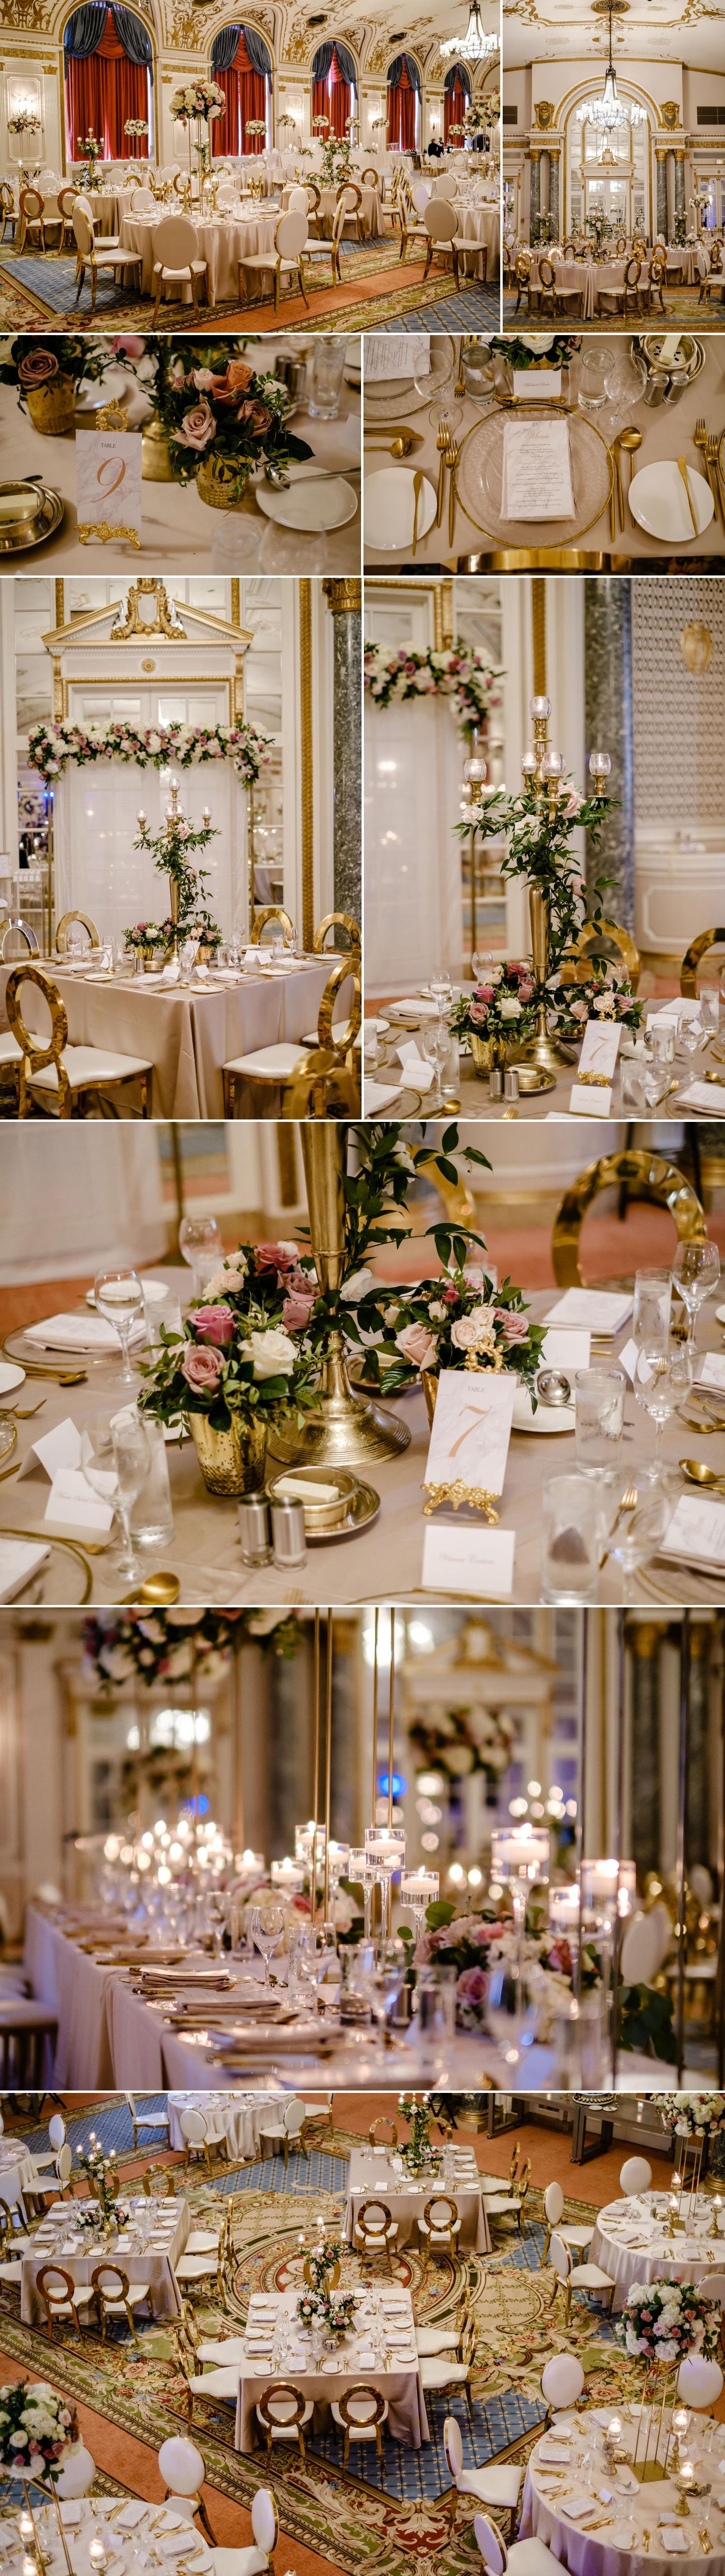 wedding details in the ball room at the chateau Laurier